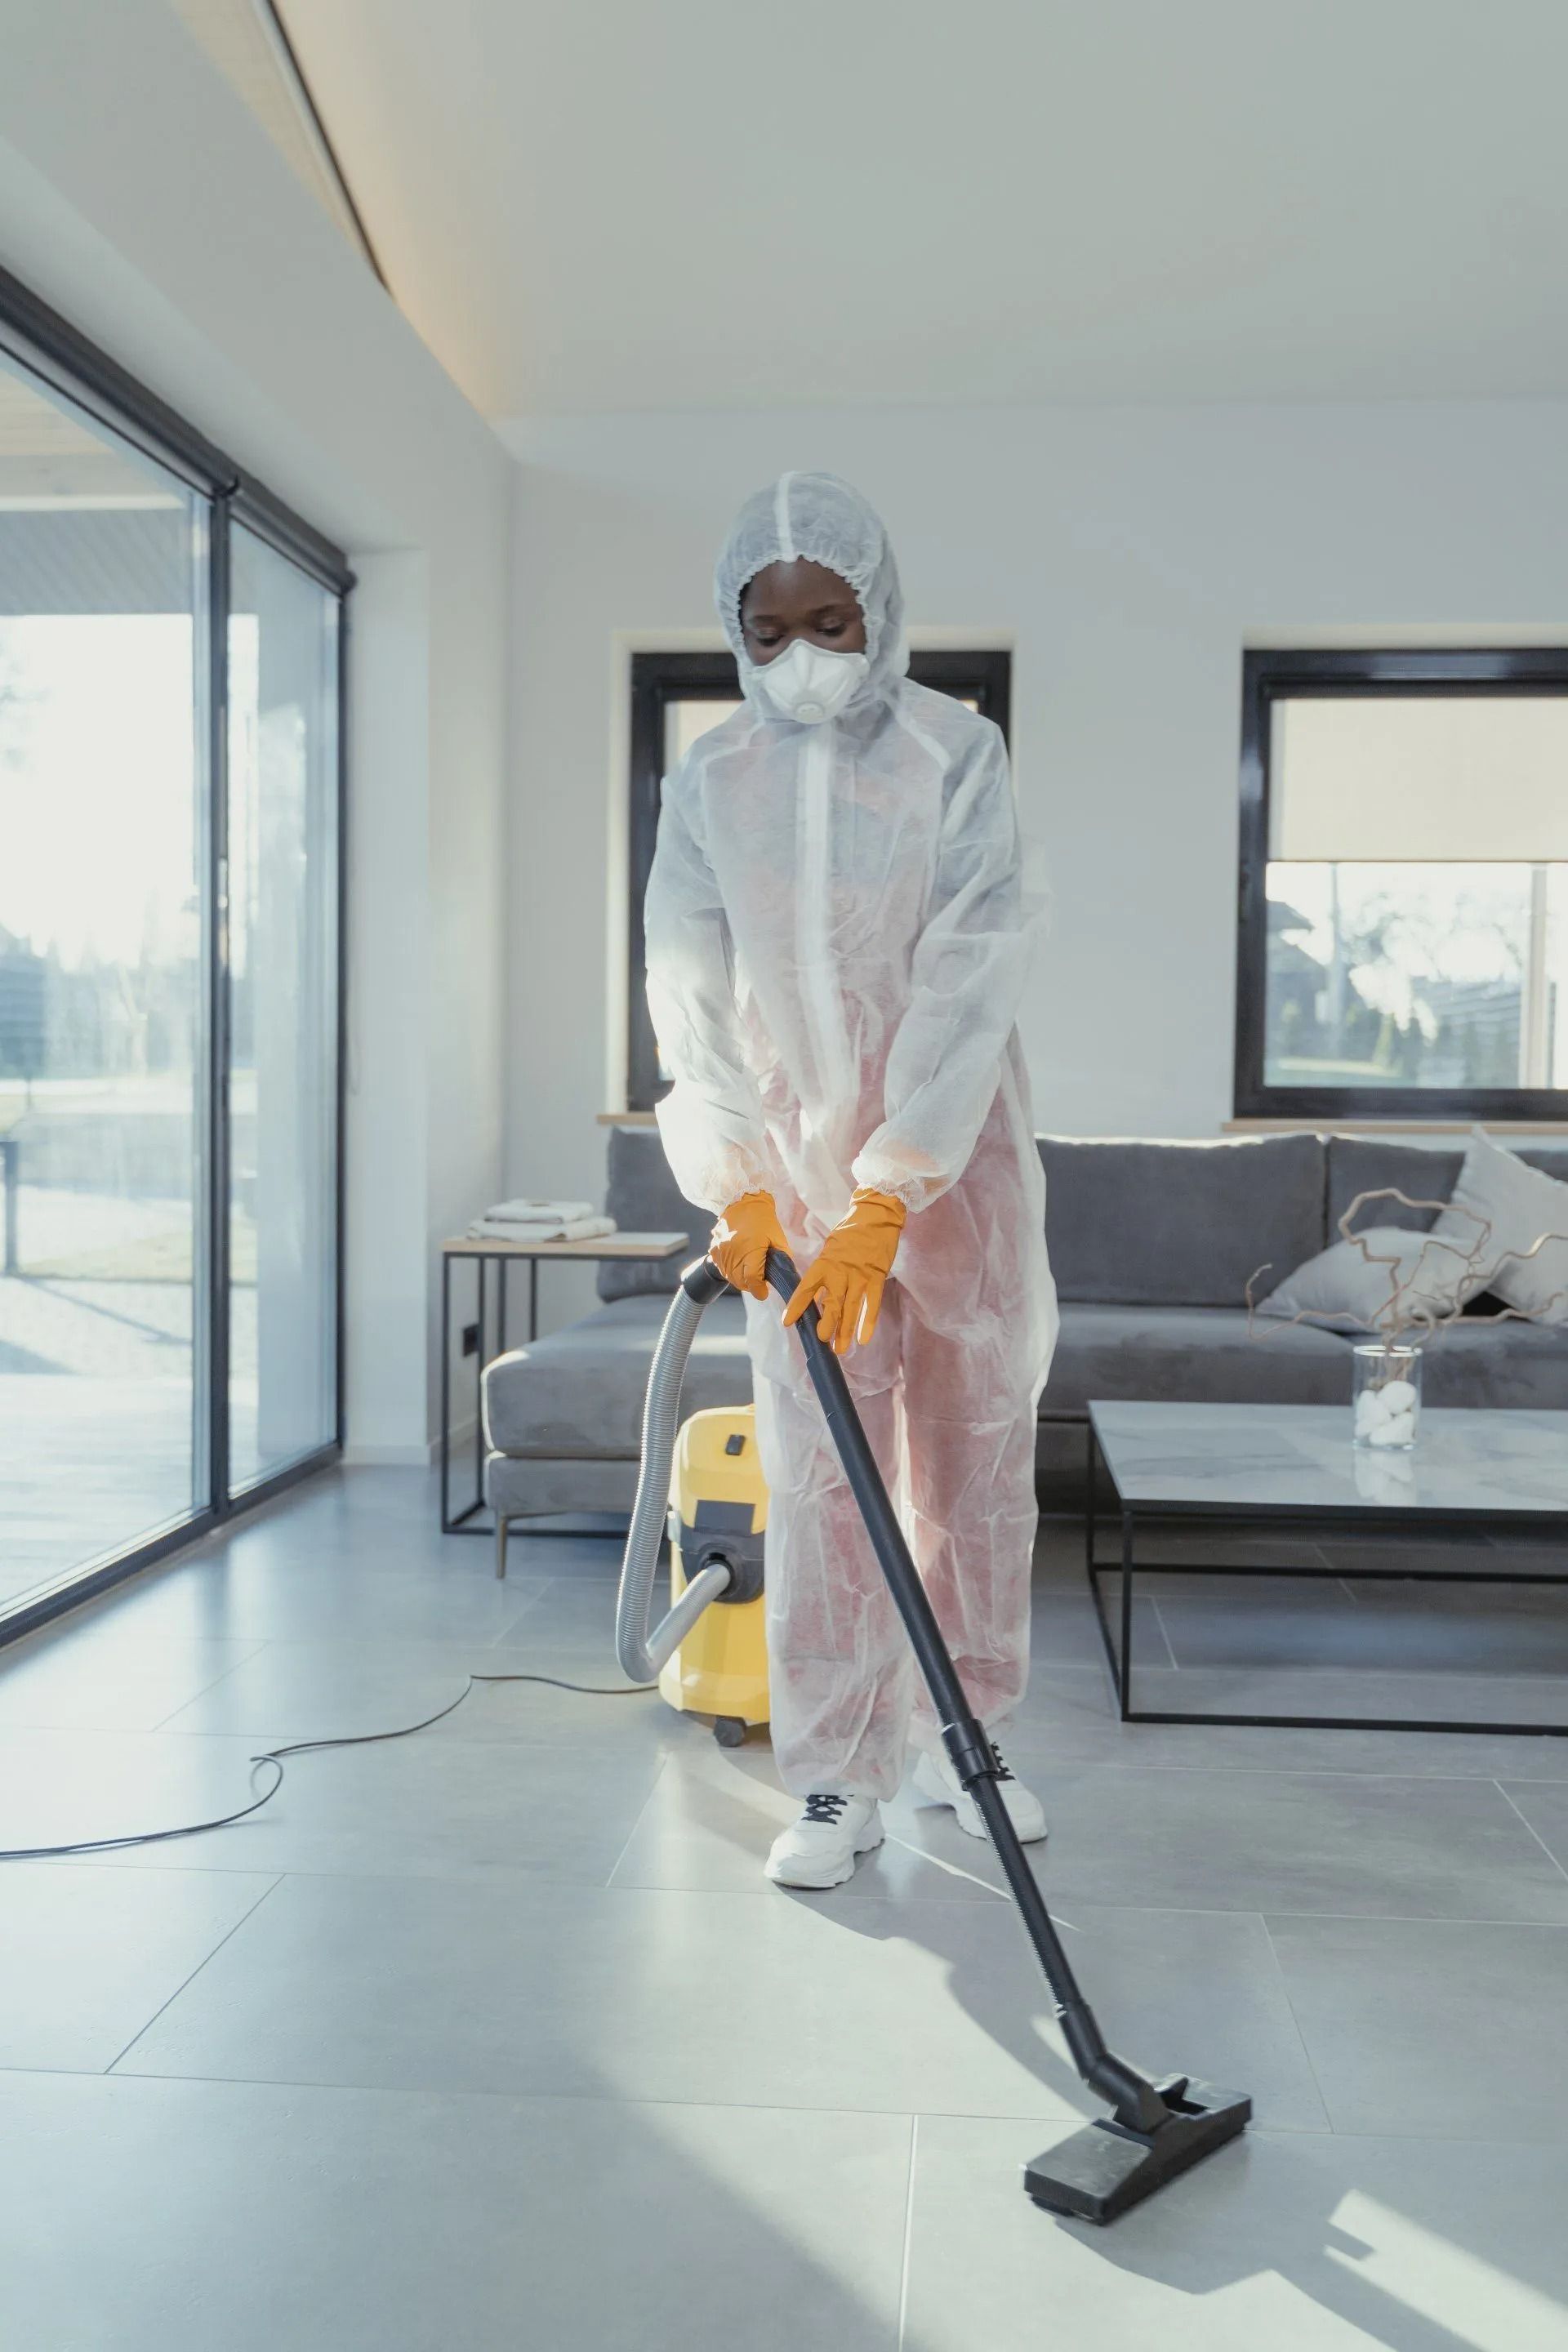 Cleaning House with Protective Suit